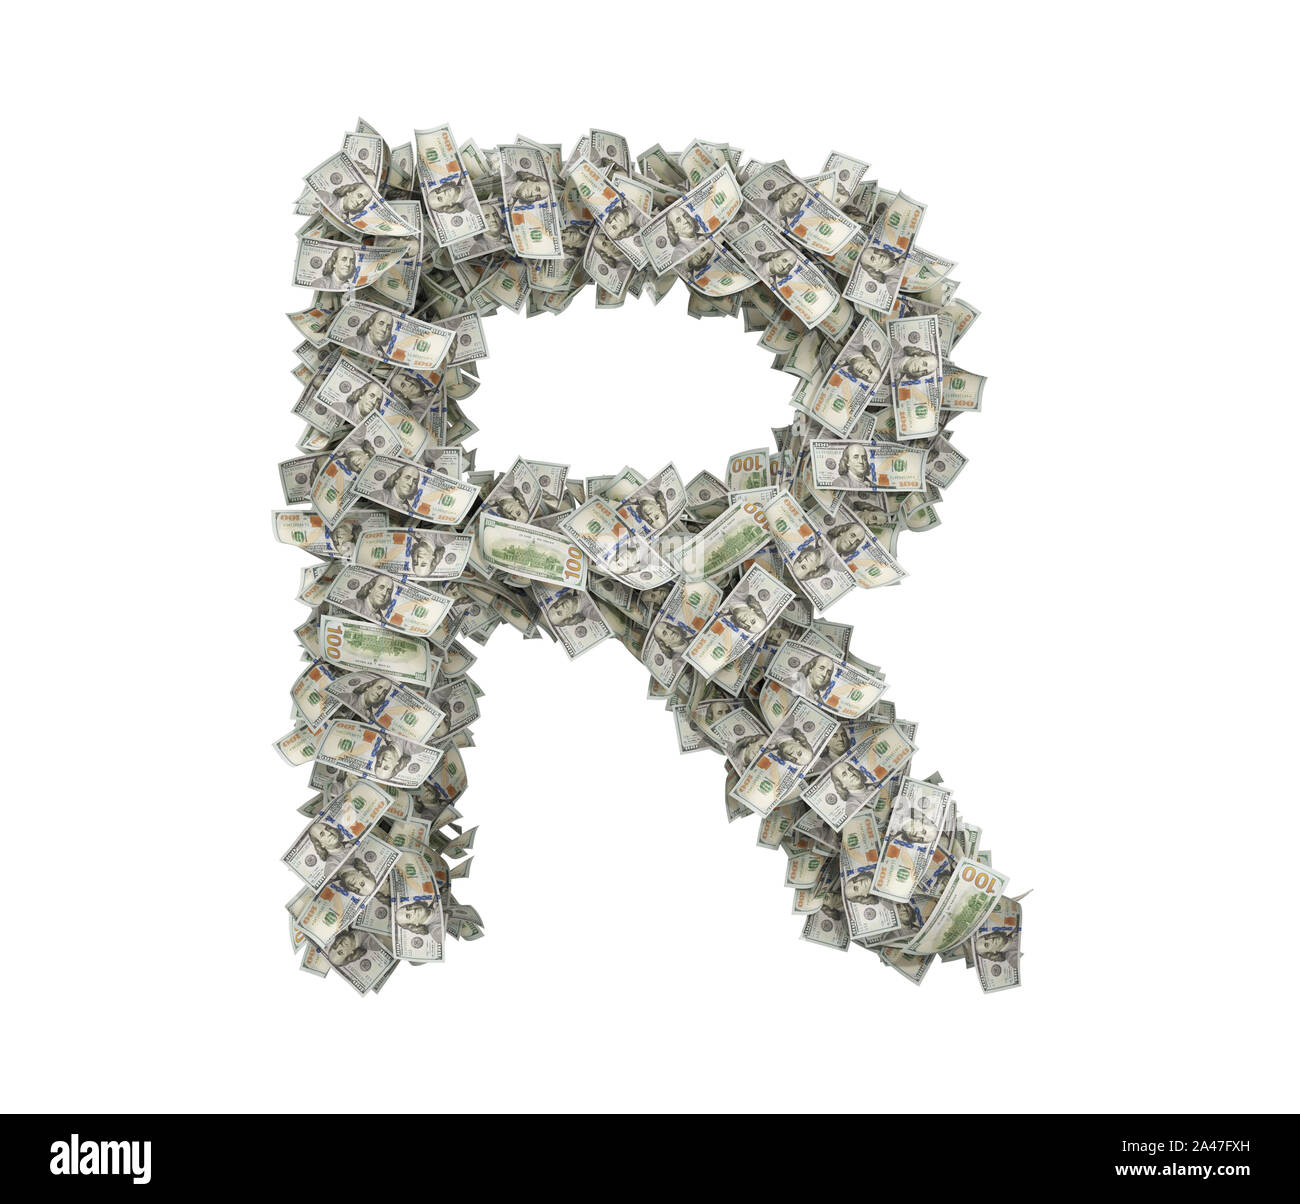 3d rendering of a large isolated large letter R made of many one hundred dollar bills. Money and bills. American currency. Alphabet and letters. Stock Photo